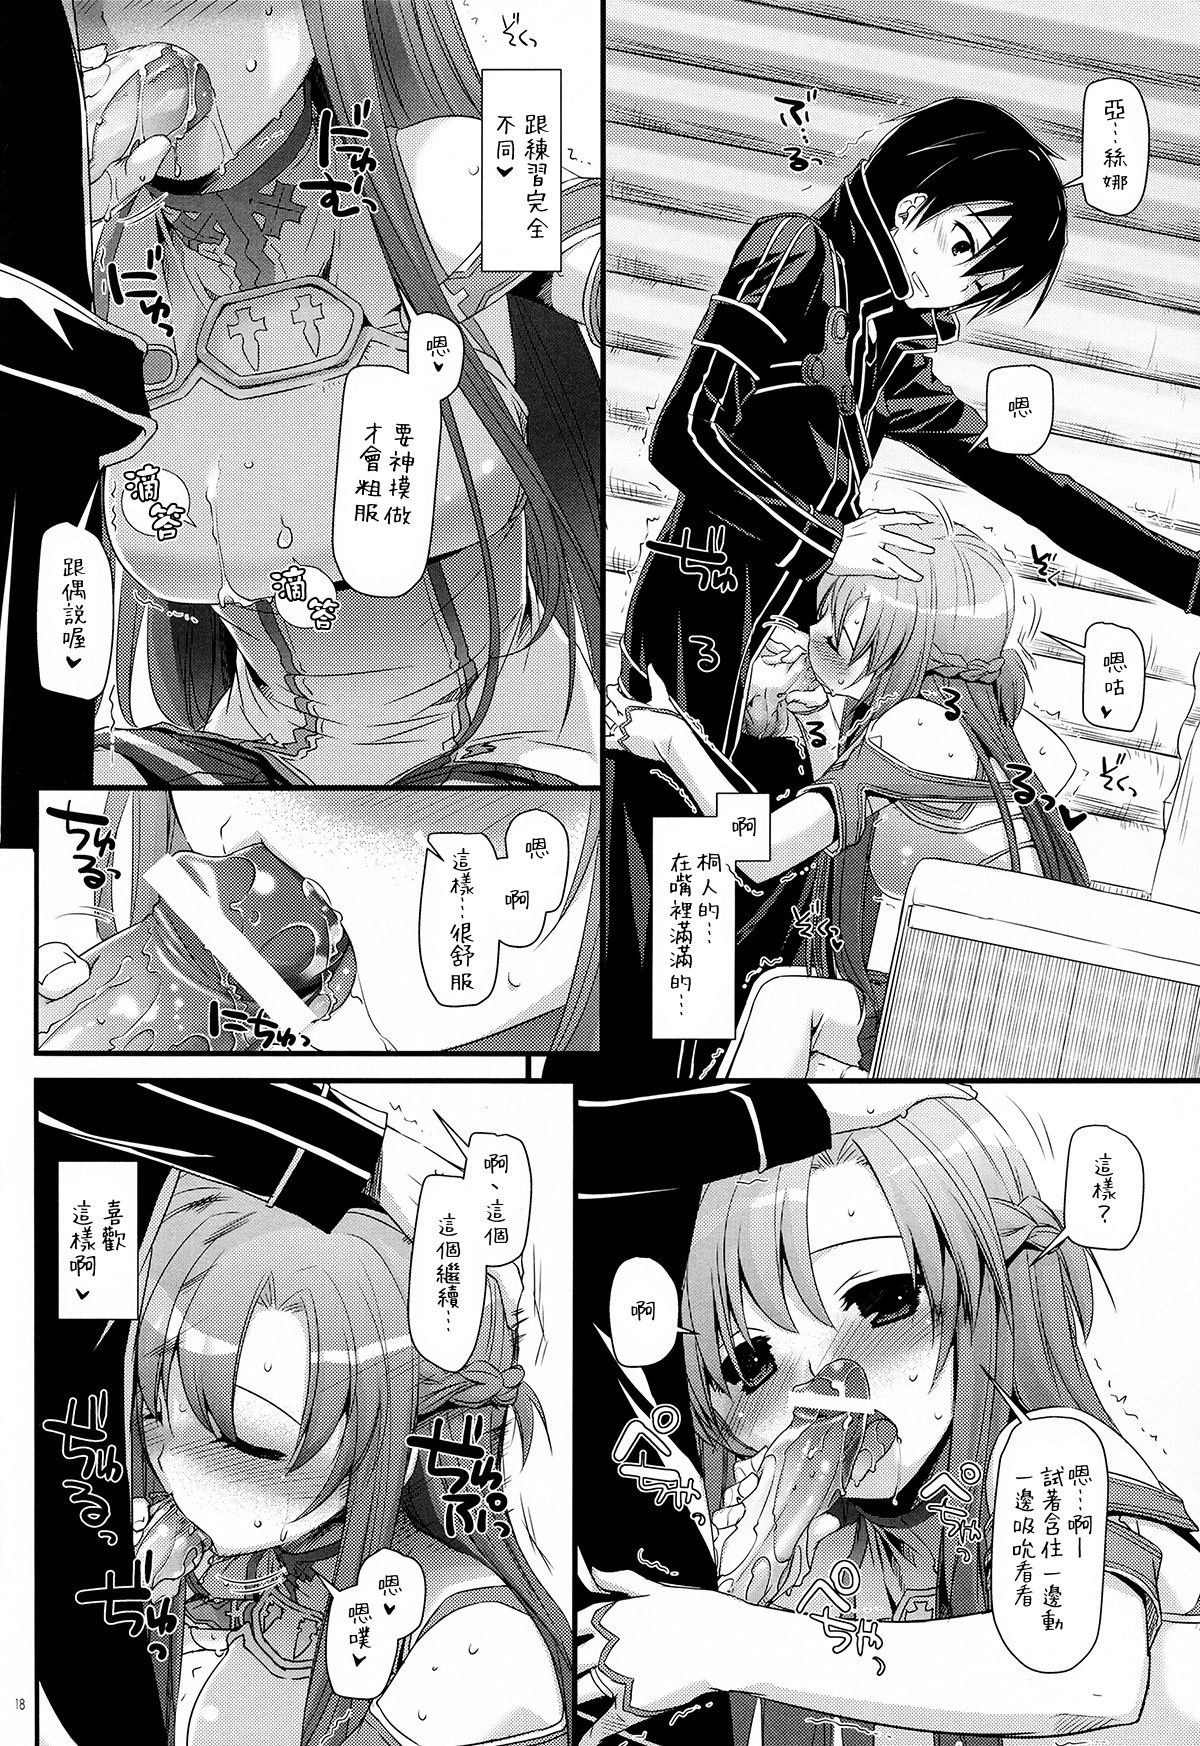 D.L. Action 71 hentai manga picture 17